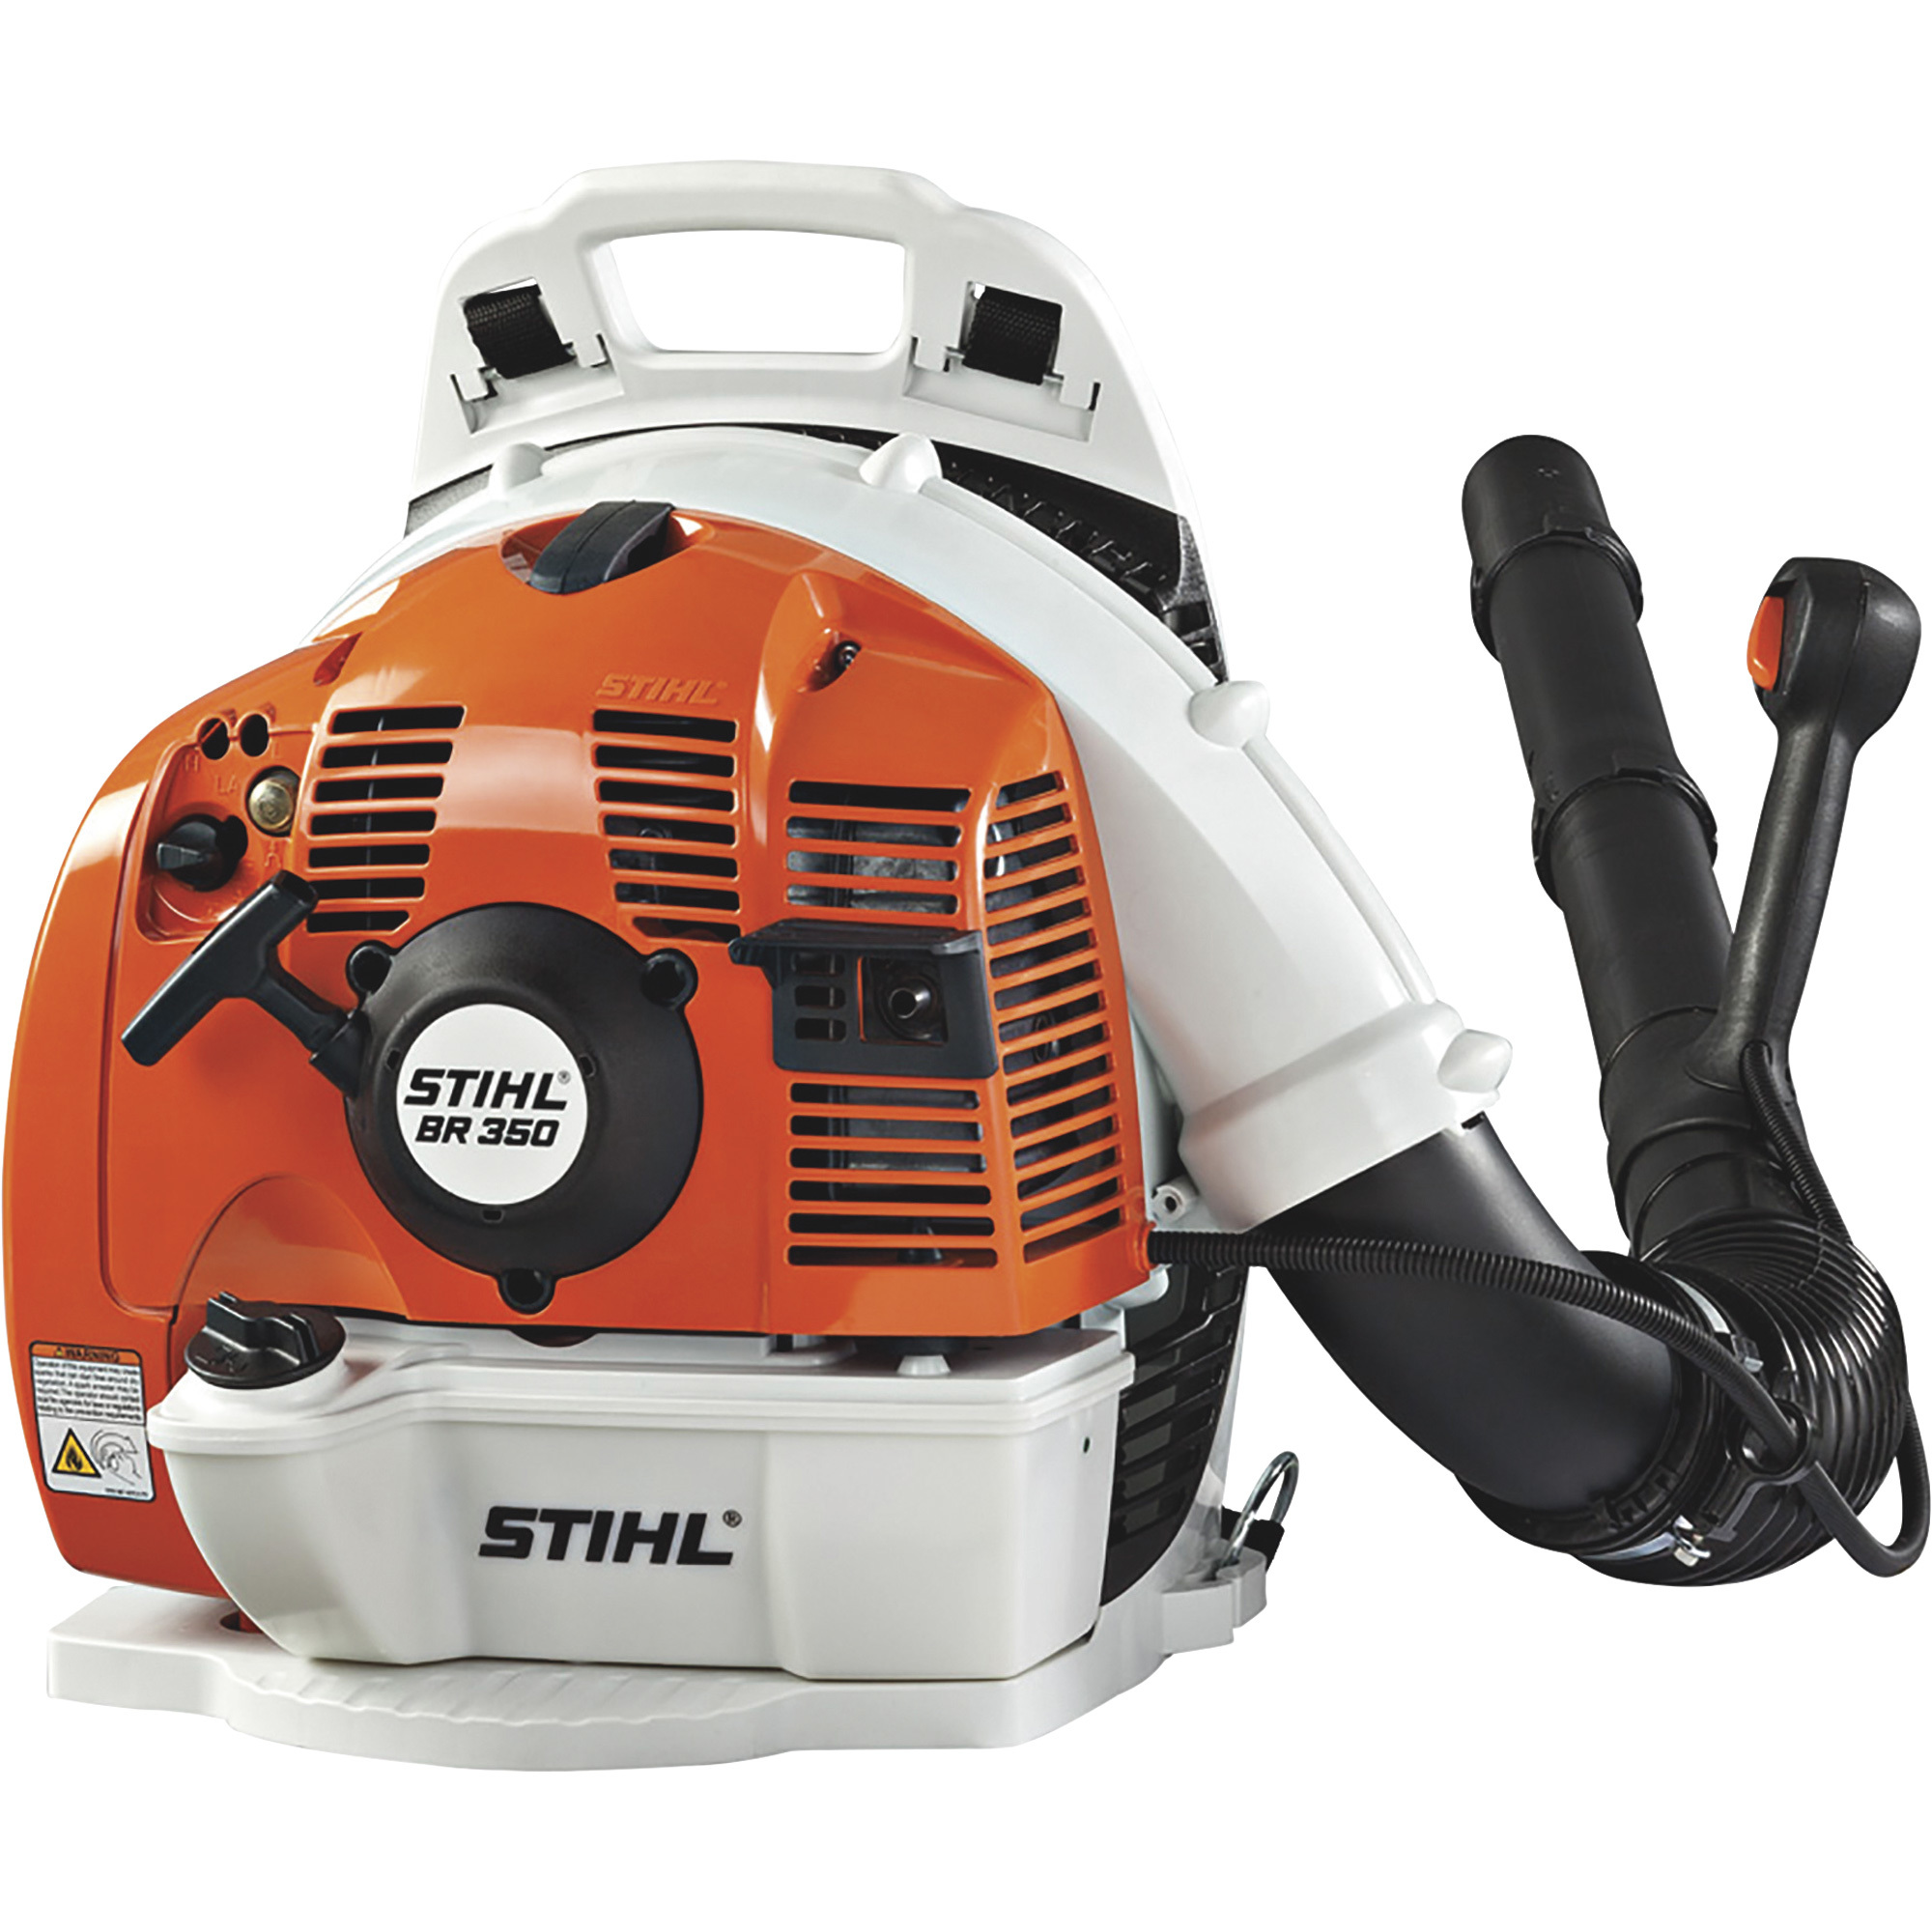 Stihl BR Series Gas-Powered Backpack Blower â 63.3cc, 167 MPH, 436 CFM, Model BR 350